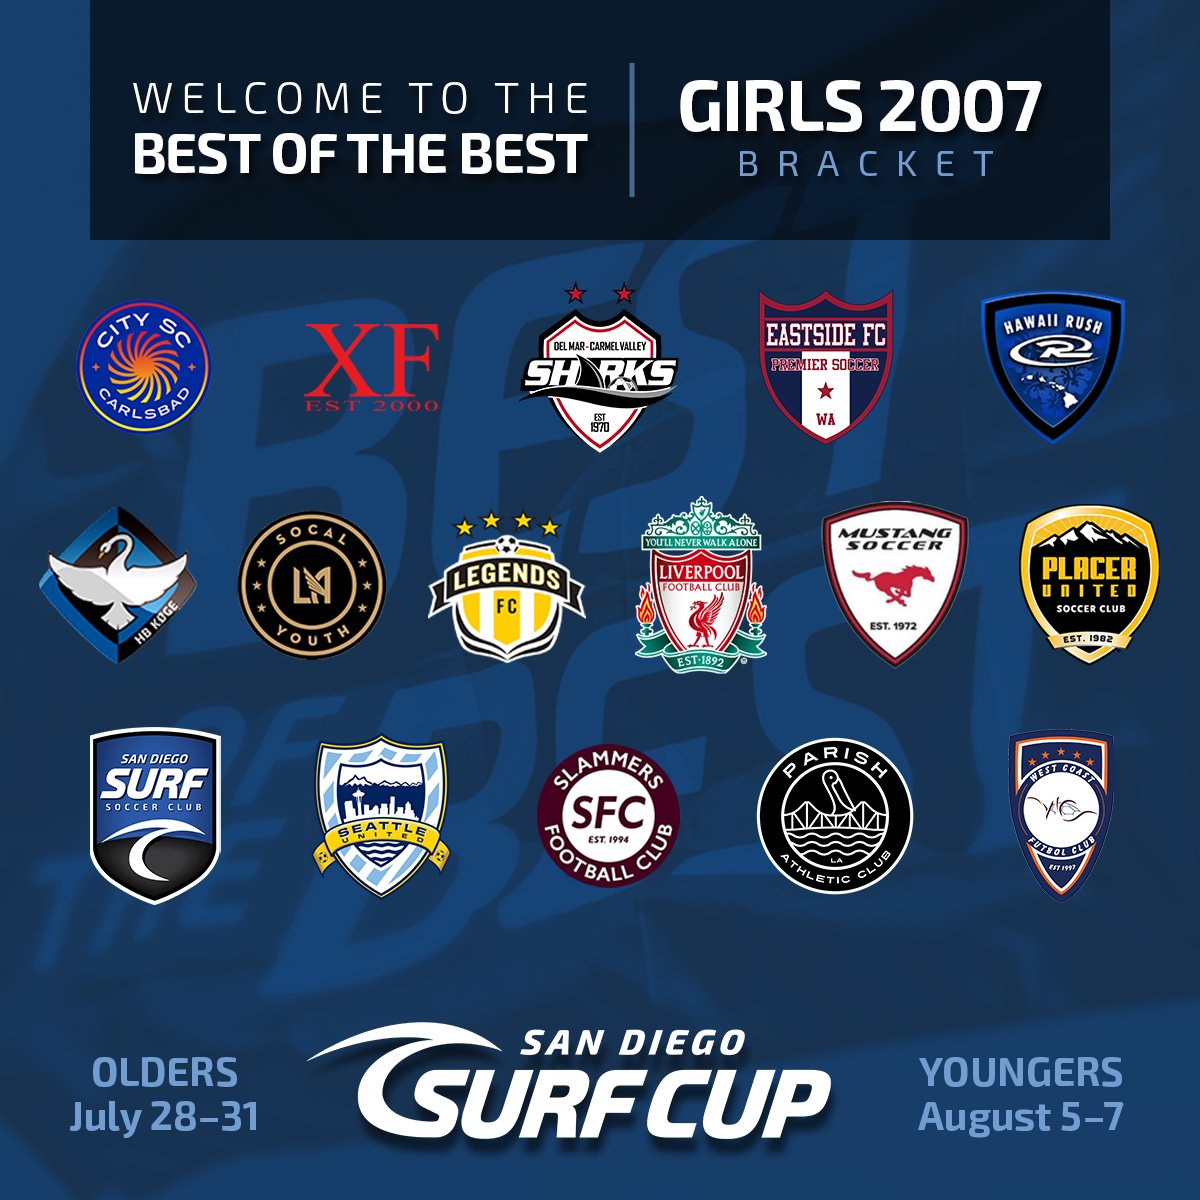 #SurfCup is thrilled to announce our 2007 Boys & Girls #BestOfTheBest Brackets! With SEVEN days to go, we're gearing up to host the nation's top clubs and huge matchups! We cannot wait to hand out the 🏆 to the #BestOfTheBest!